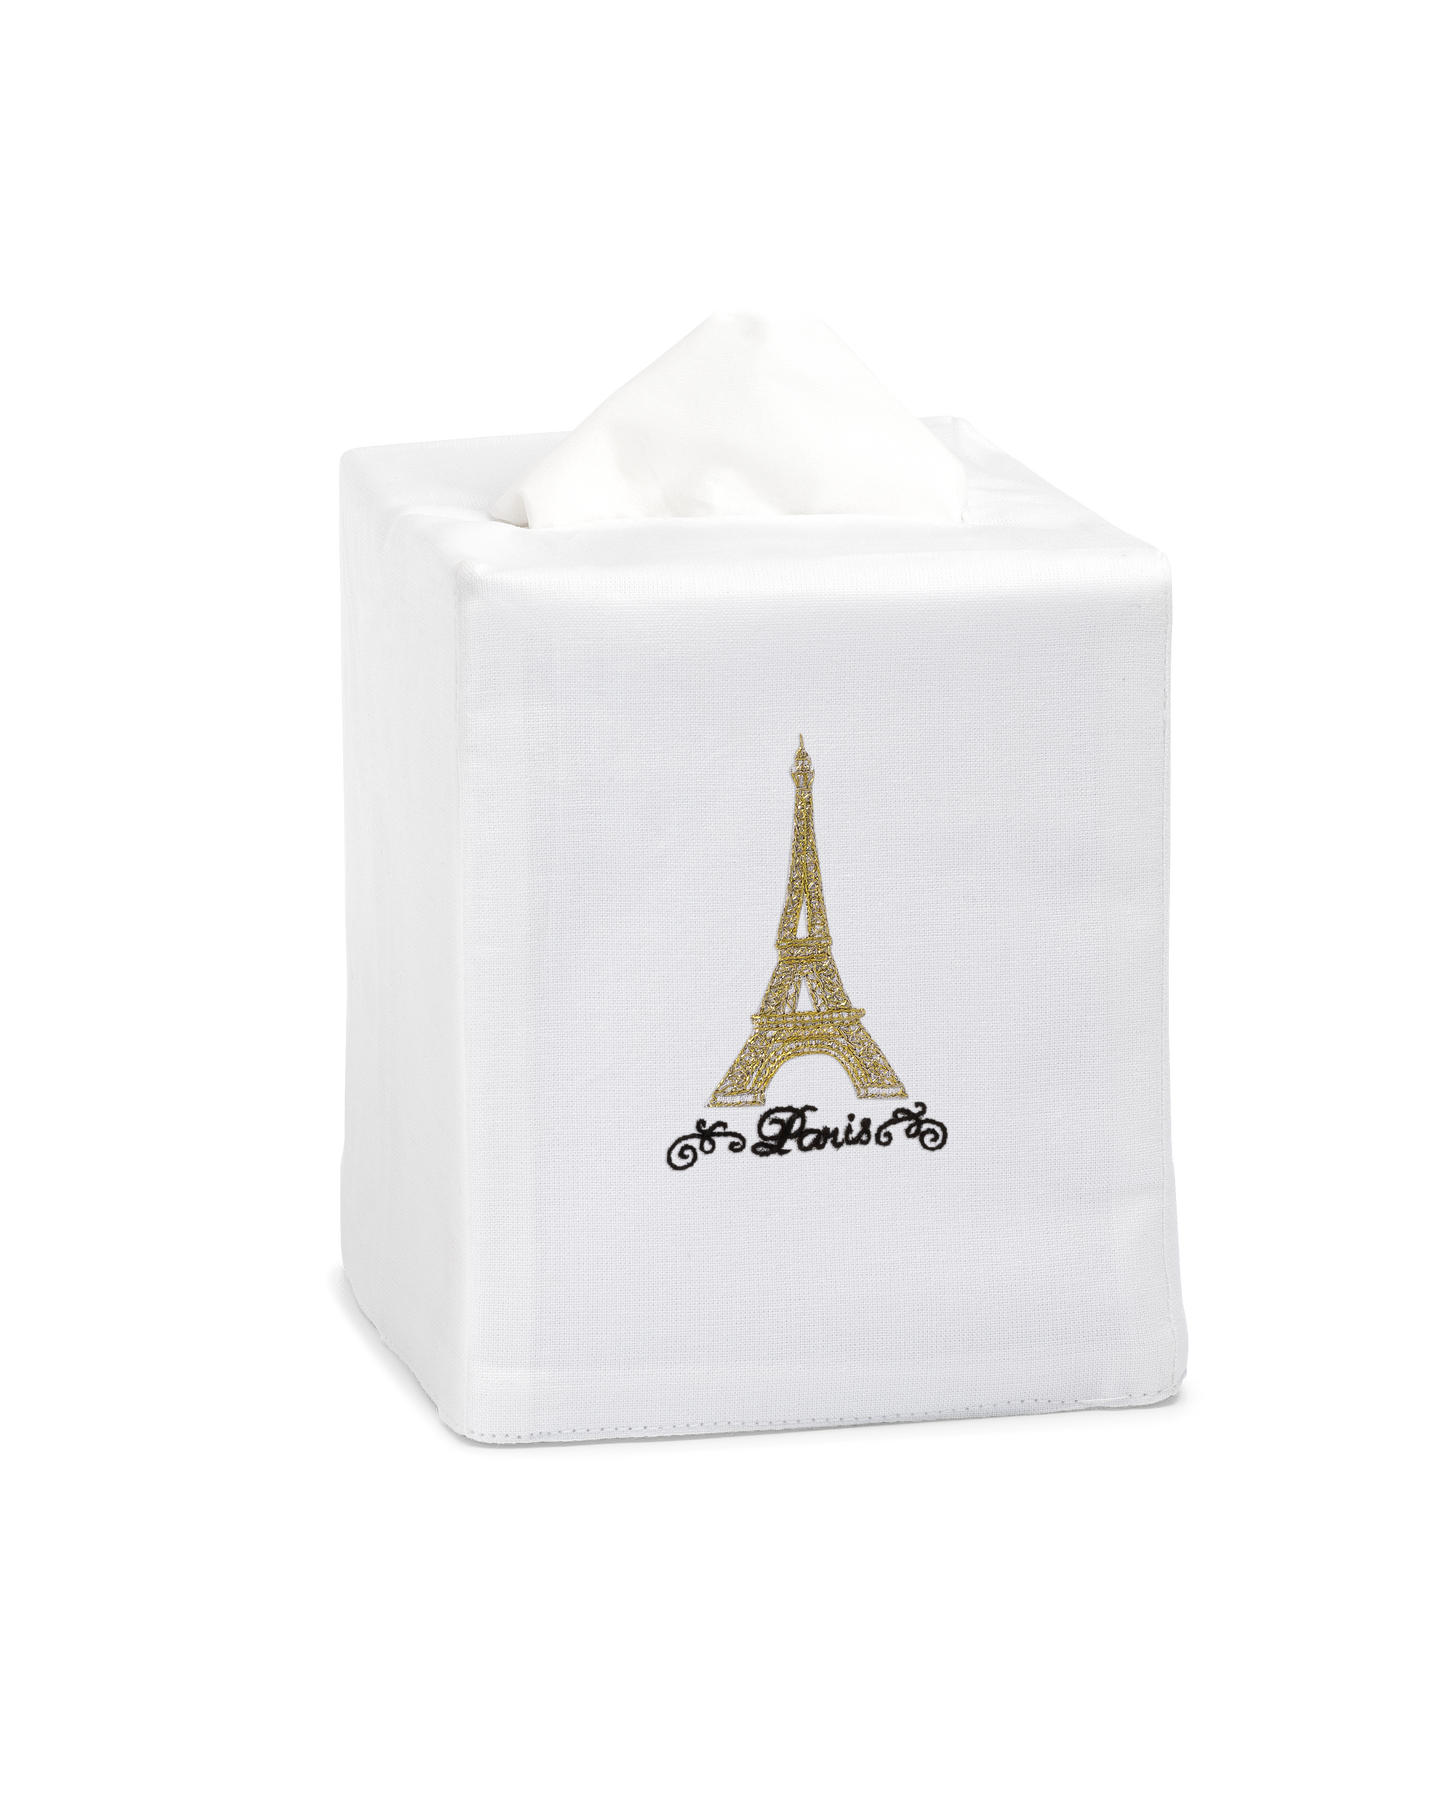 A white tissue cover with a golden eiffel tower embroidered in the center.